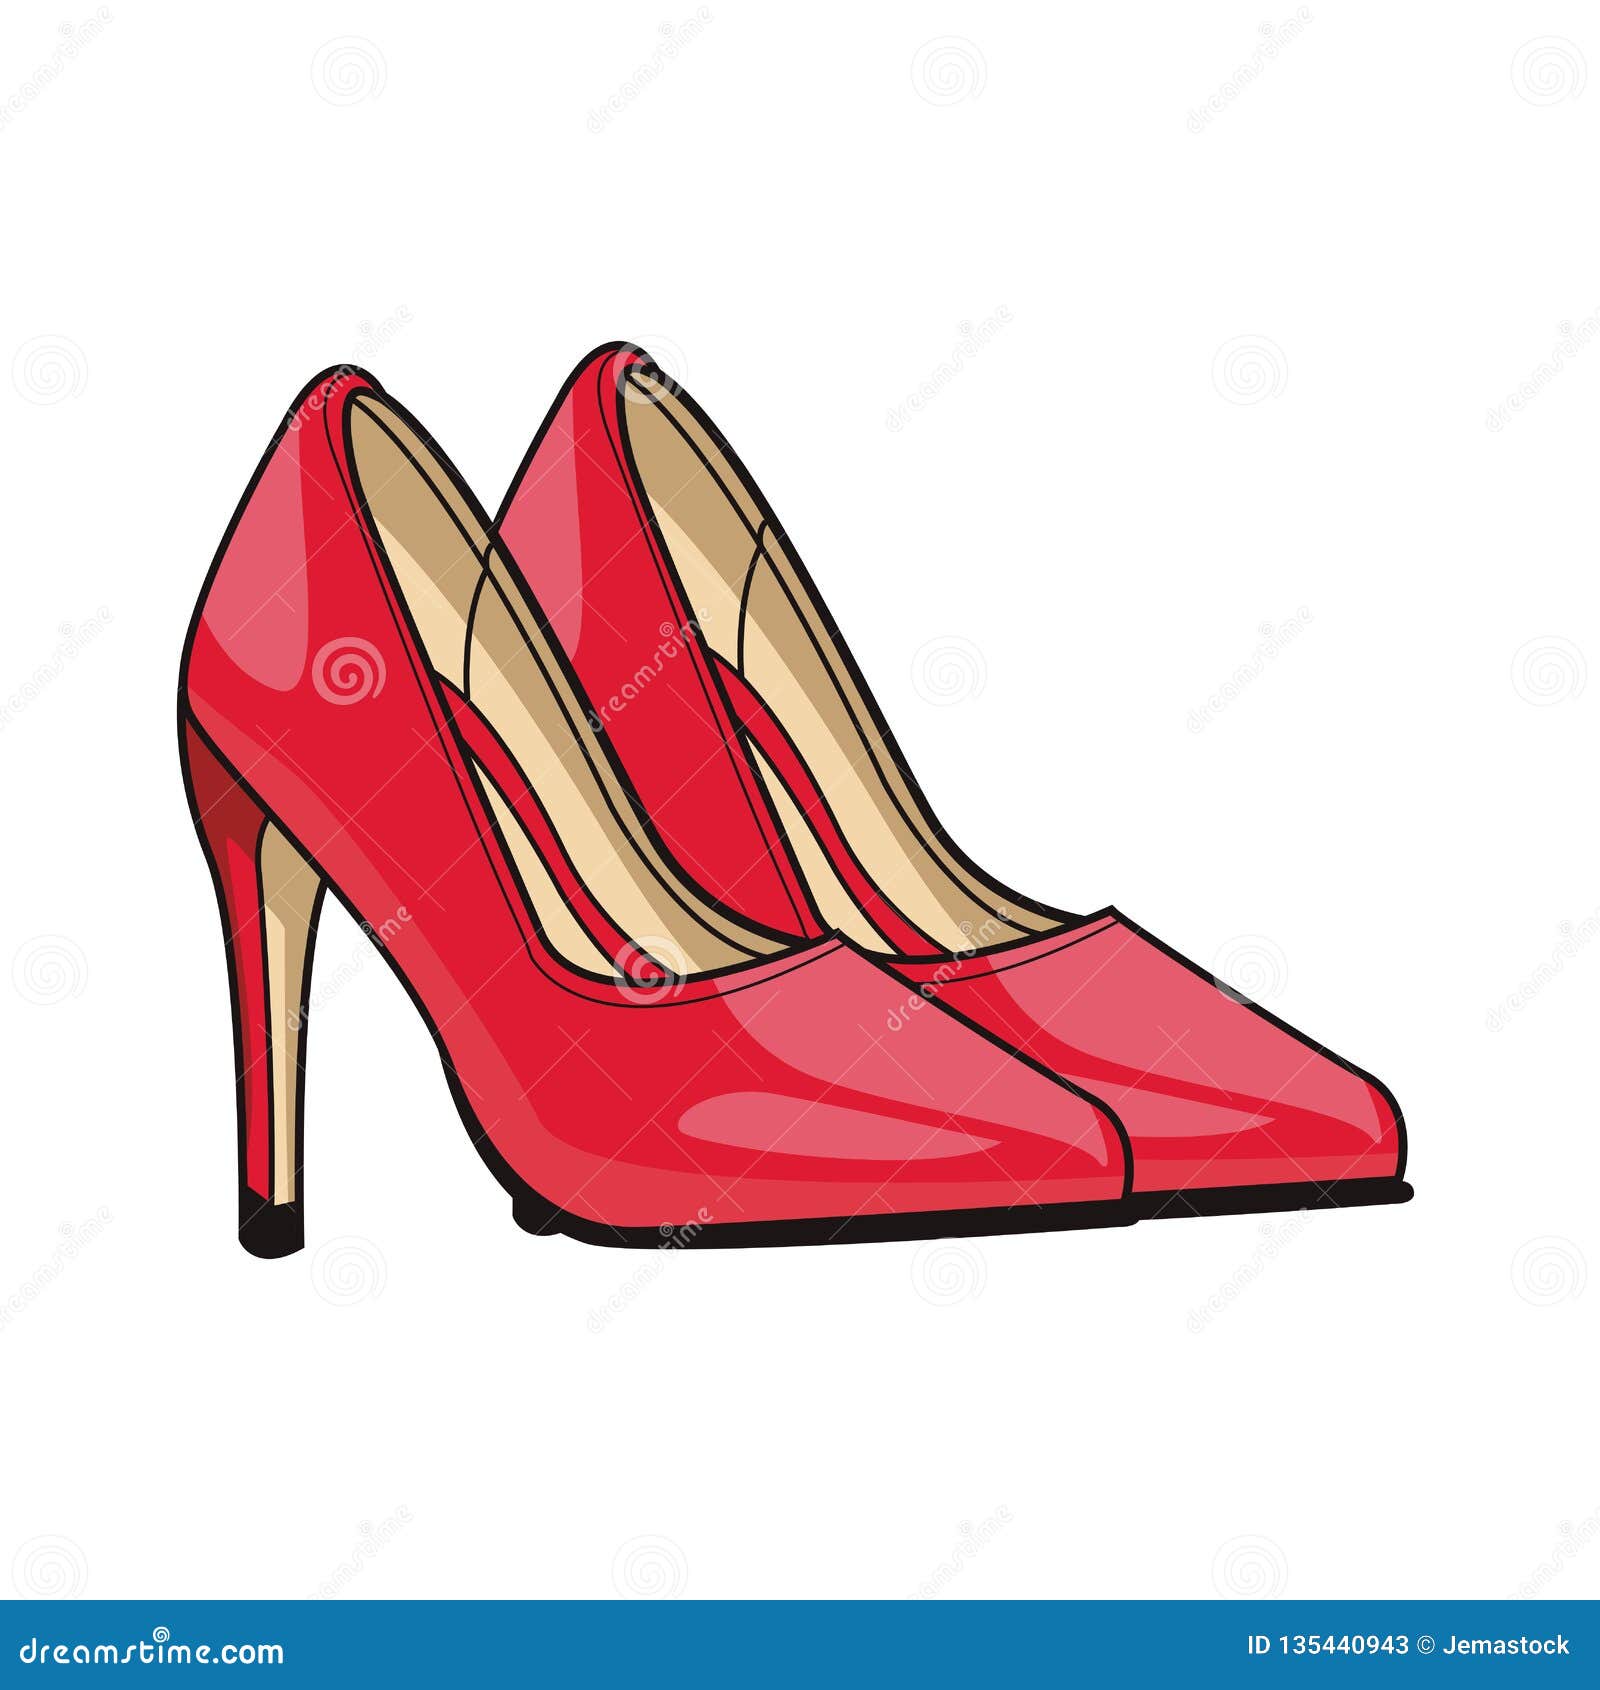 High heels shoes stock vector. Illustration of purse - 135440943